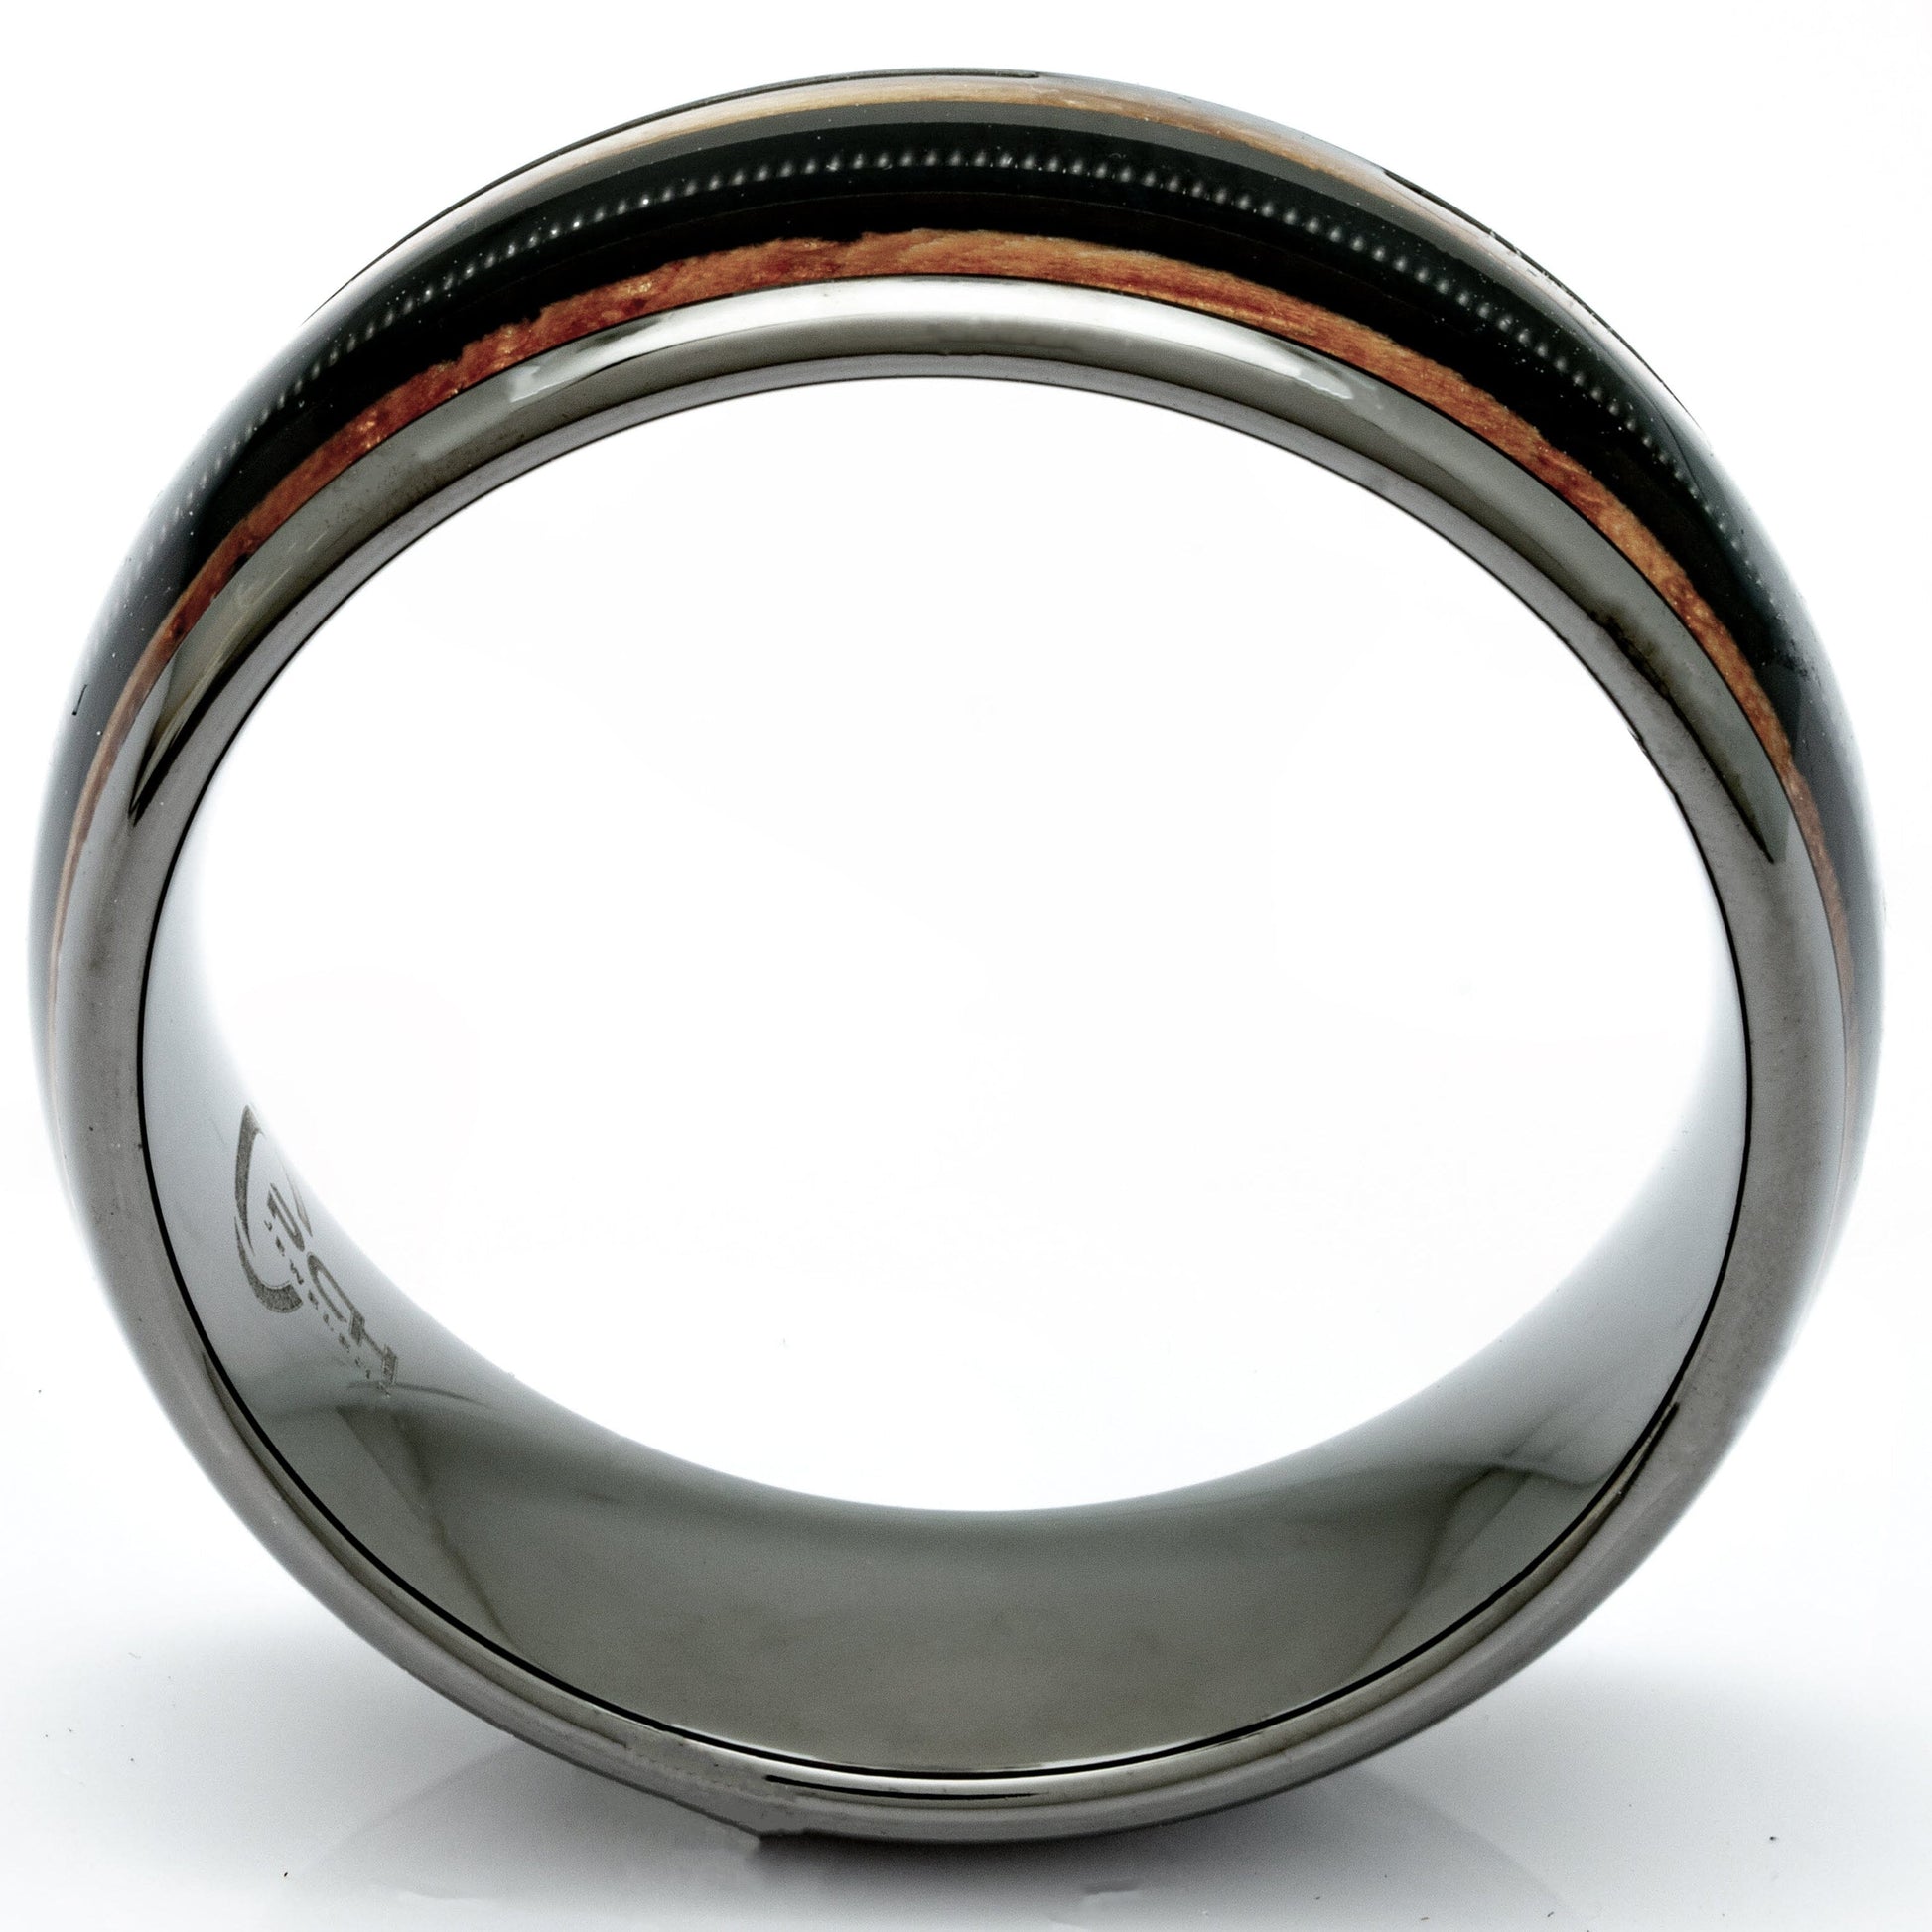 Tungsten, Whiskey Barrel, Guitar String Ring, 8mm Comfort Fit Wedding Band - PCH Jewelers INC.